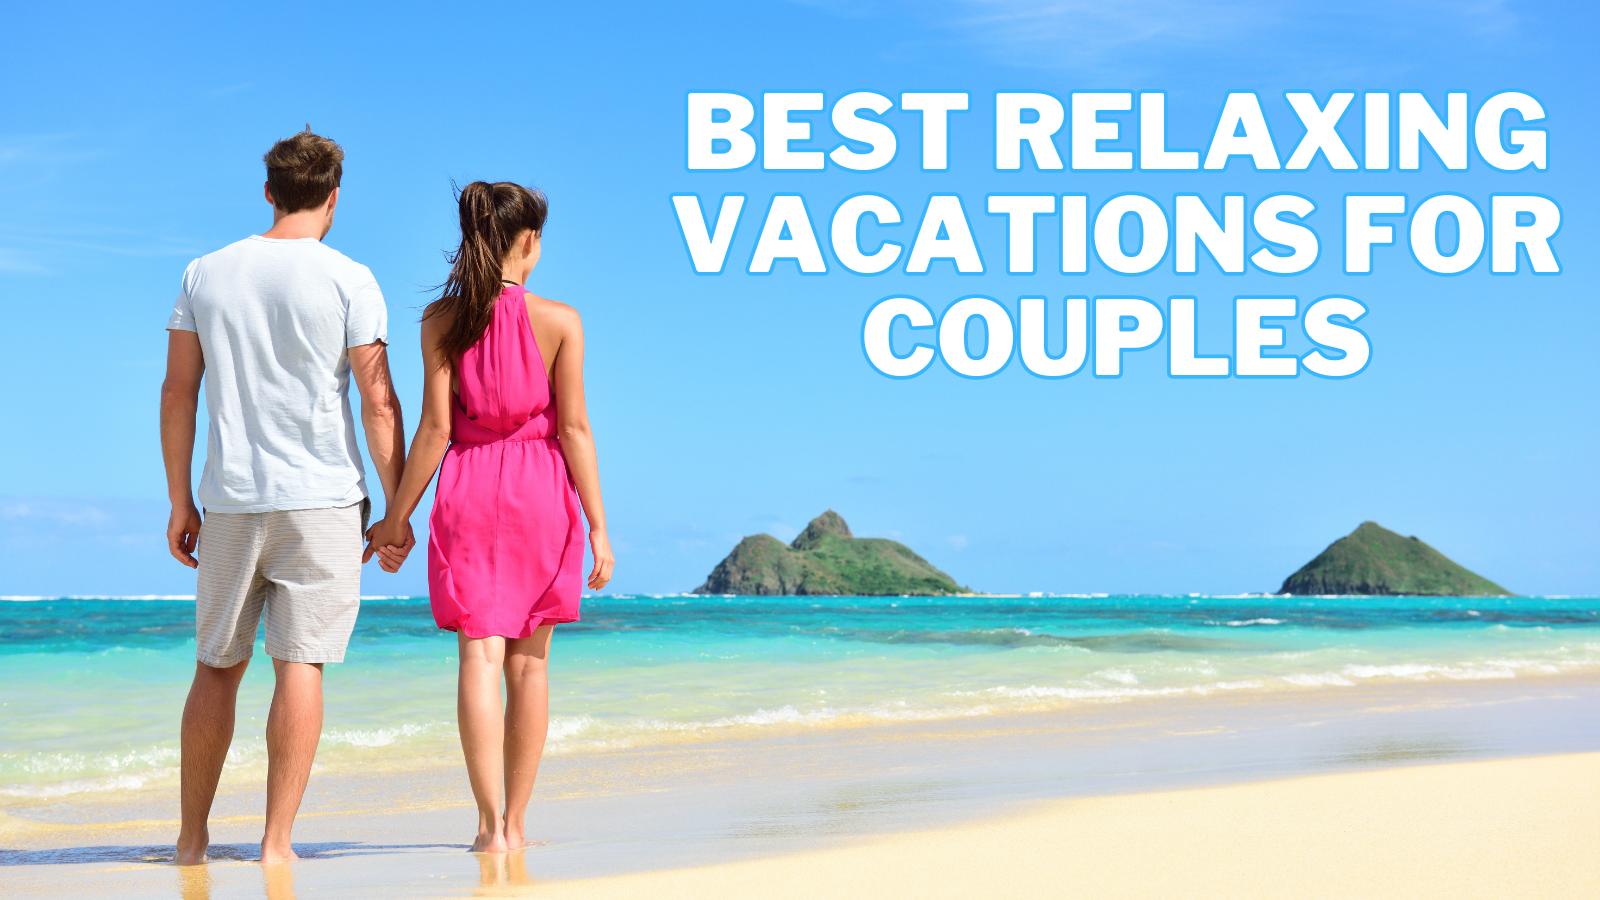 Best Relaxing Vacations For Couples